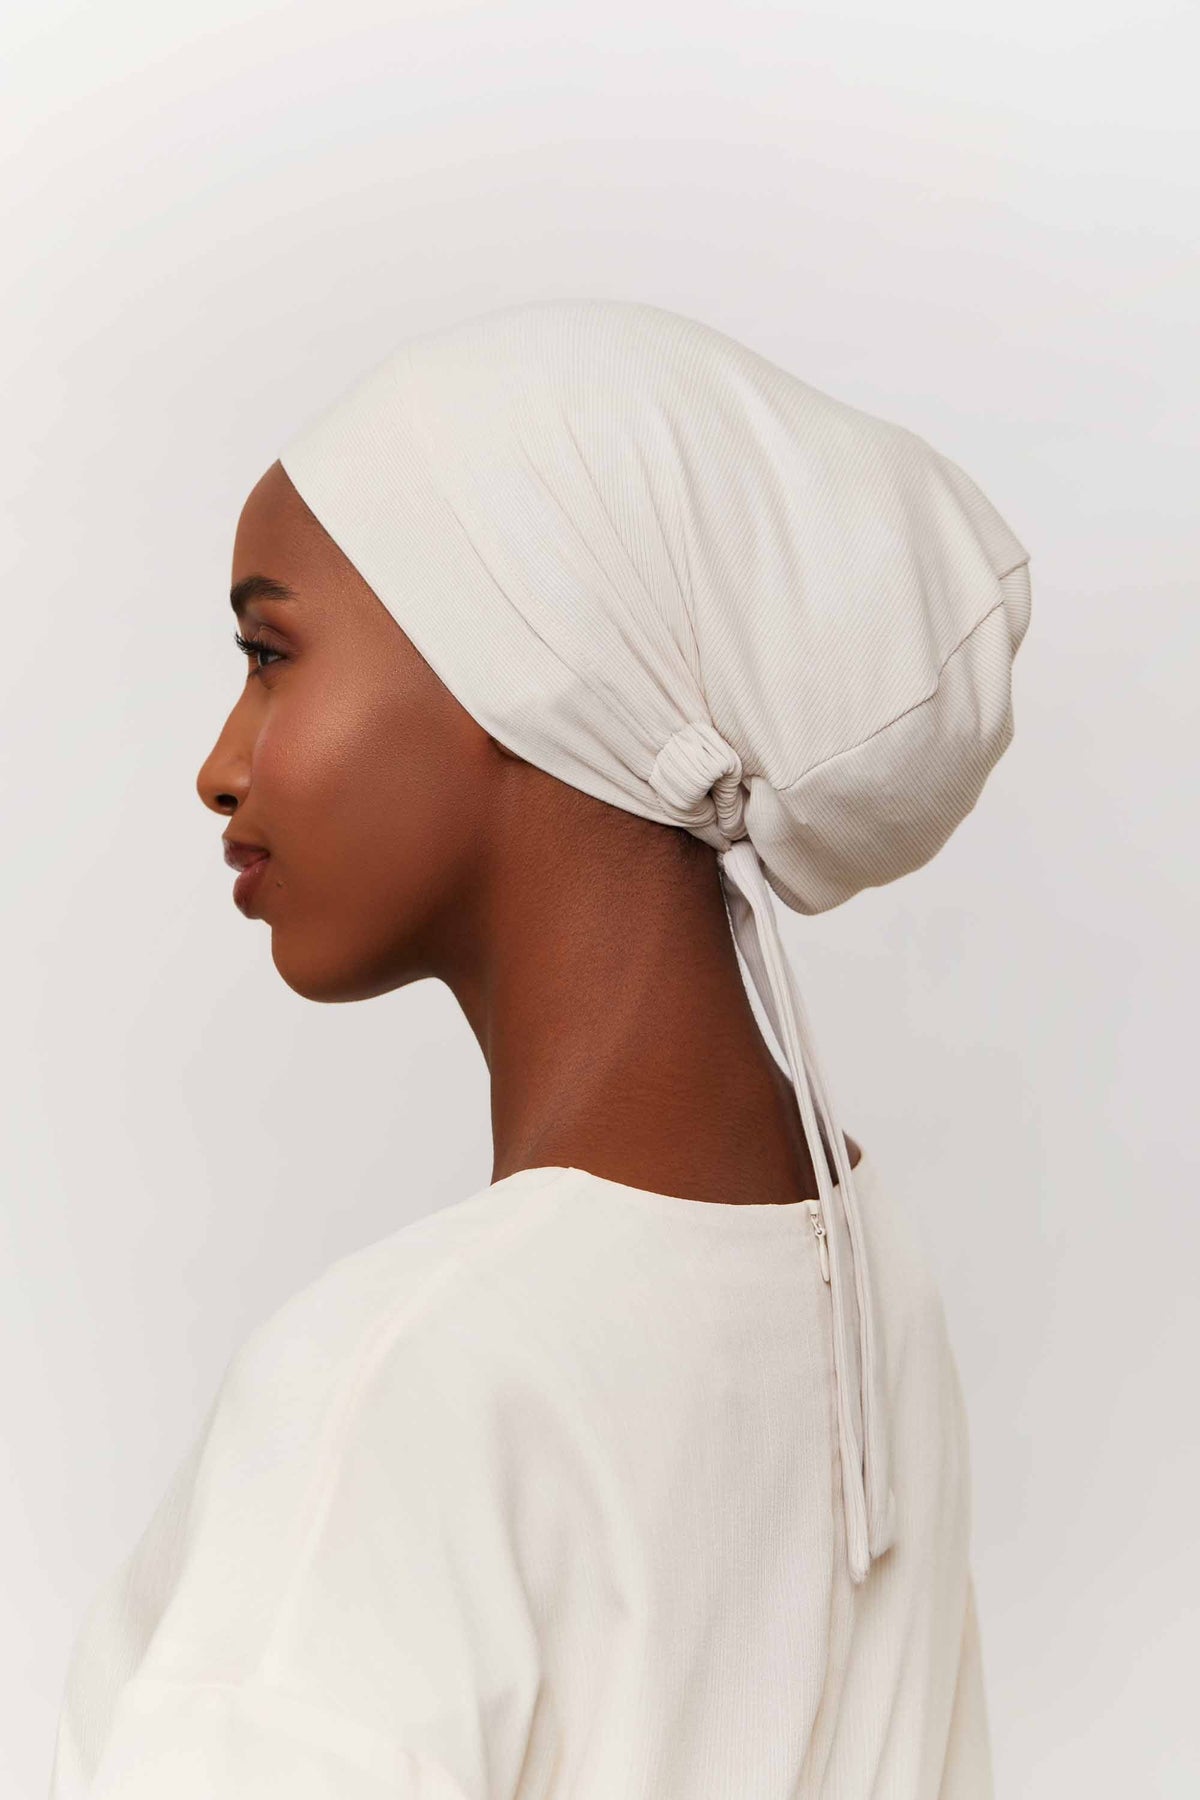 Ribbed Tie Back Undercap - Stone Extra Small Accessories Veiled 